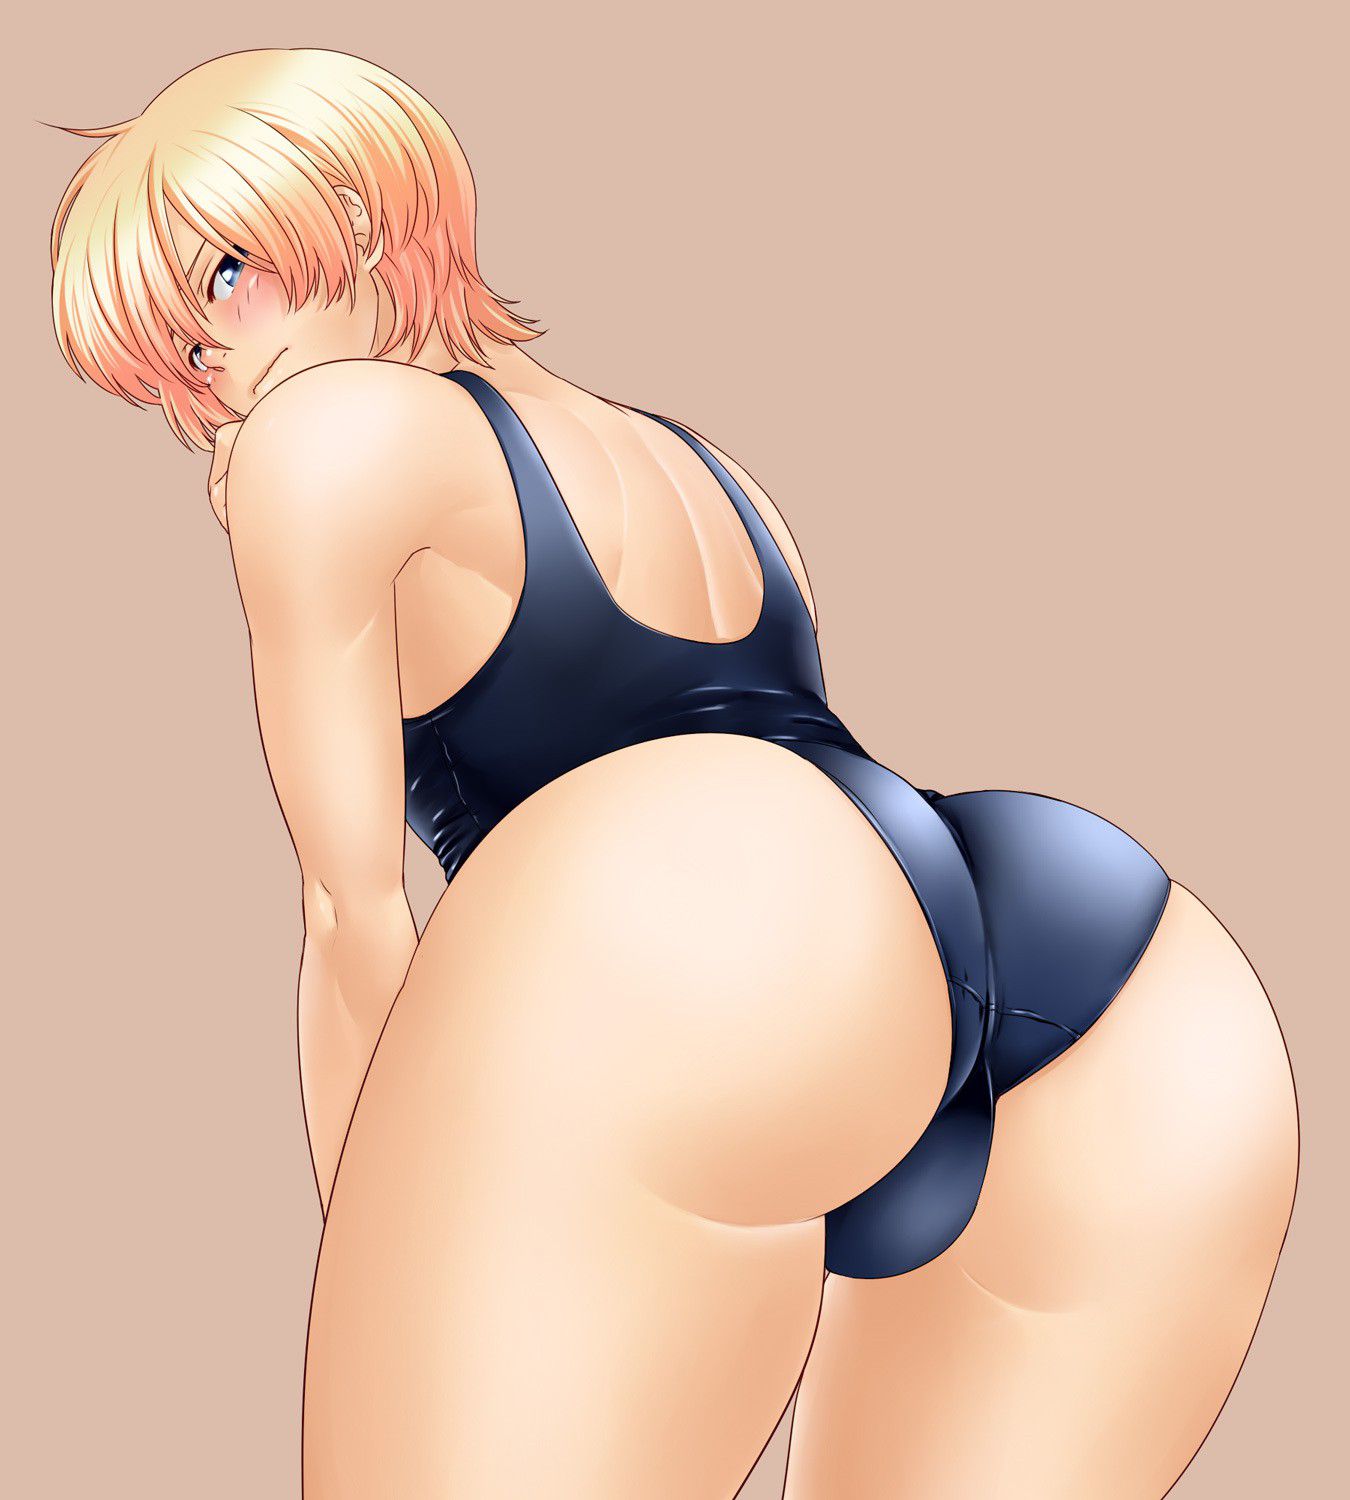 [2nd] Second erotic image of a girl having a sexual erotic butt 13 [buttocks] 34